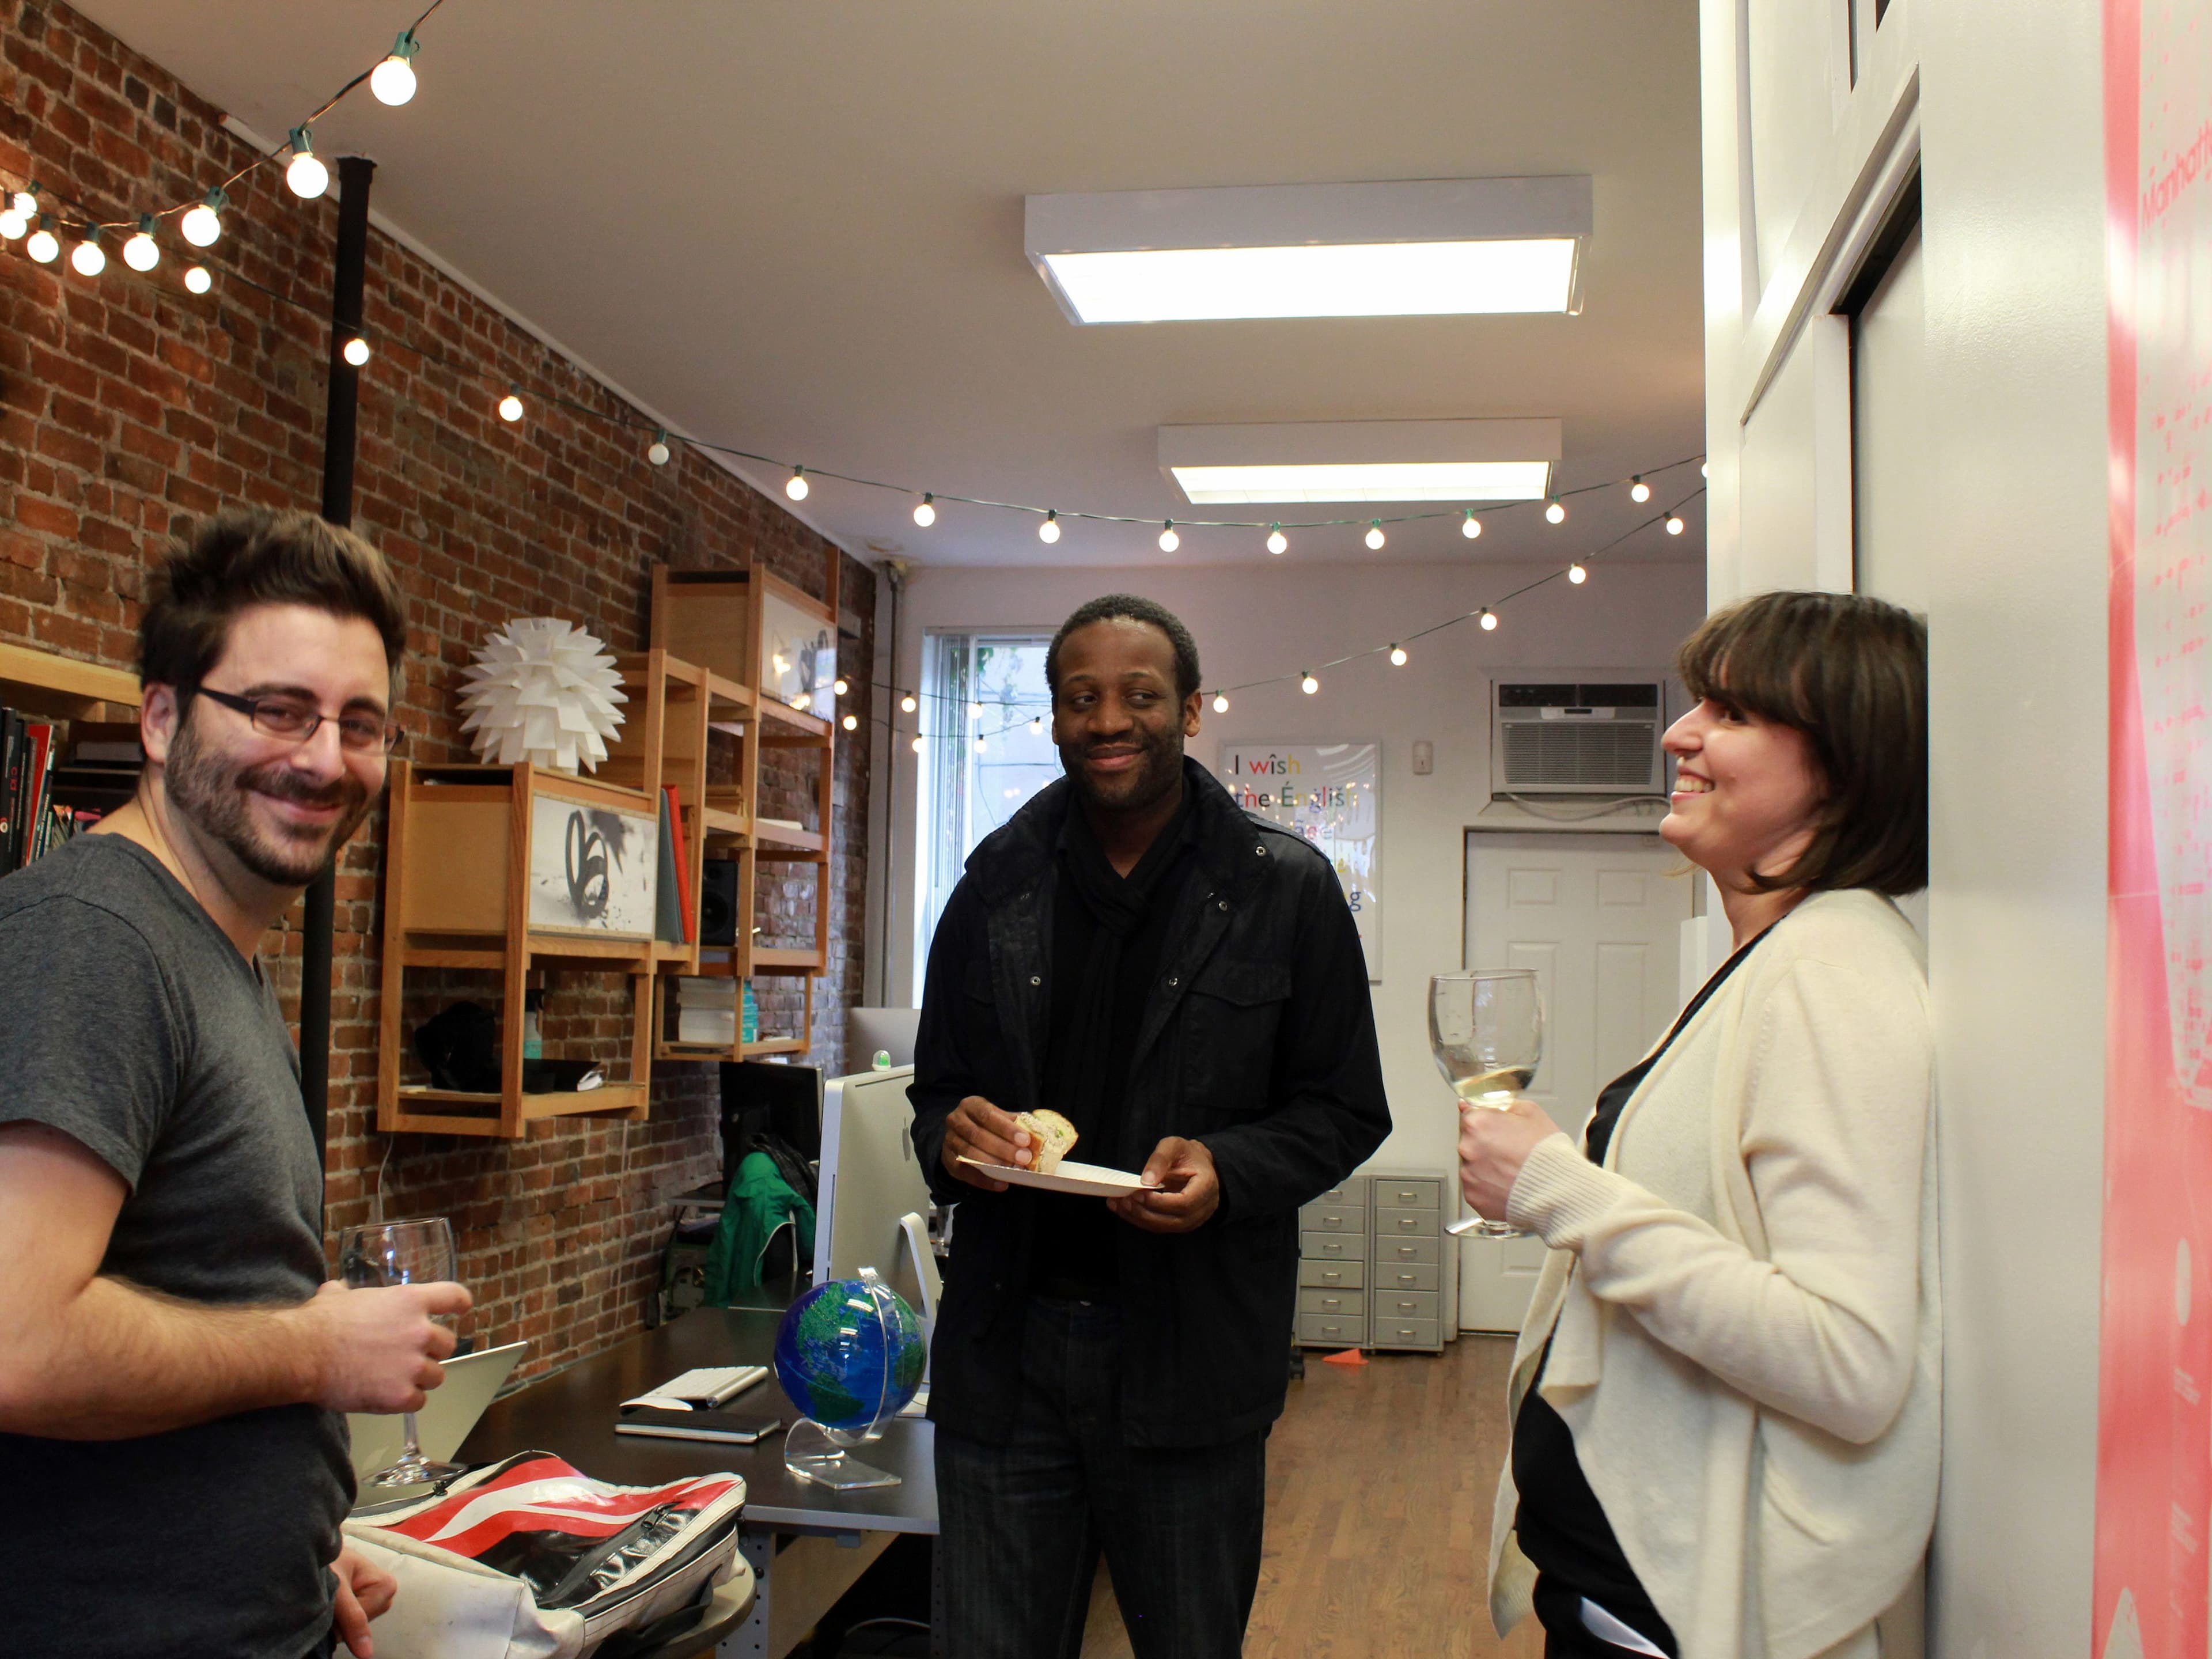 Three people are socializing in a cozy office with string lights and exposed brick walls. Two men and one woman are smiling and holding drinks, with one man holding a plate. Shelving in the background displays various items, including a globe.